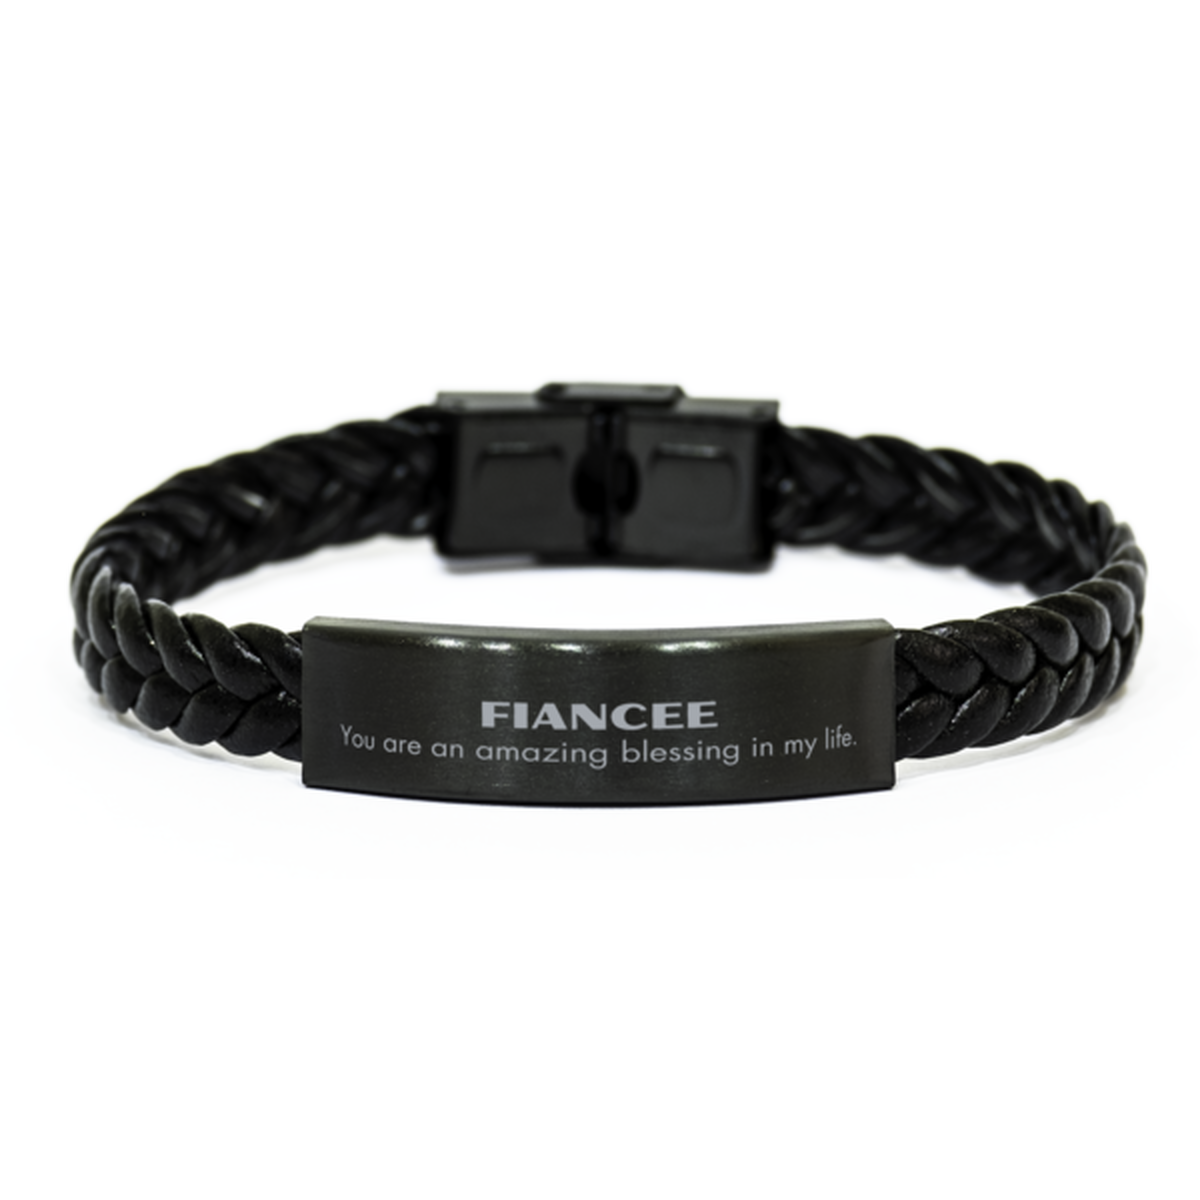 Fiancee Braided Leather Bracelet, You are an amazing blessing in my life, Thank You Gifts For Fiancee, Inspirational Birthday Christmas Unique Gifts For Fiancee